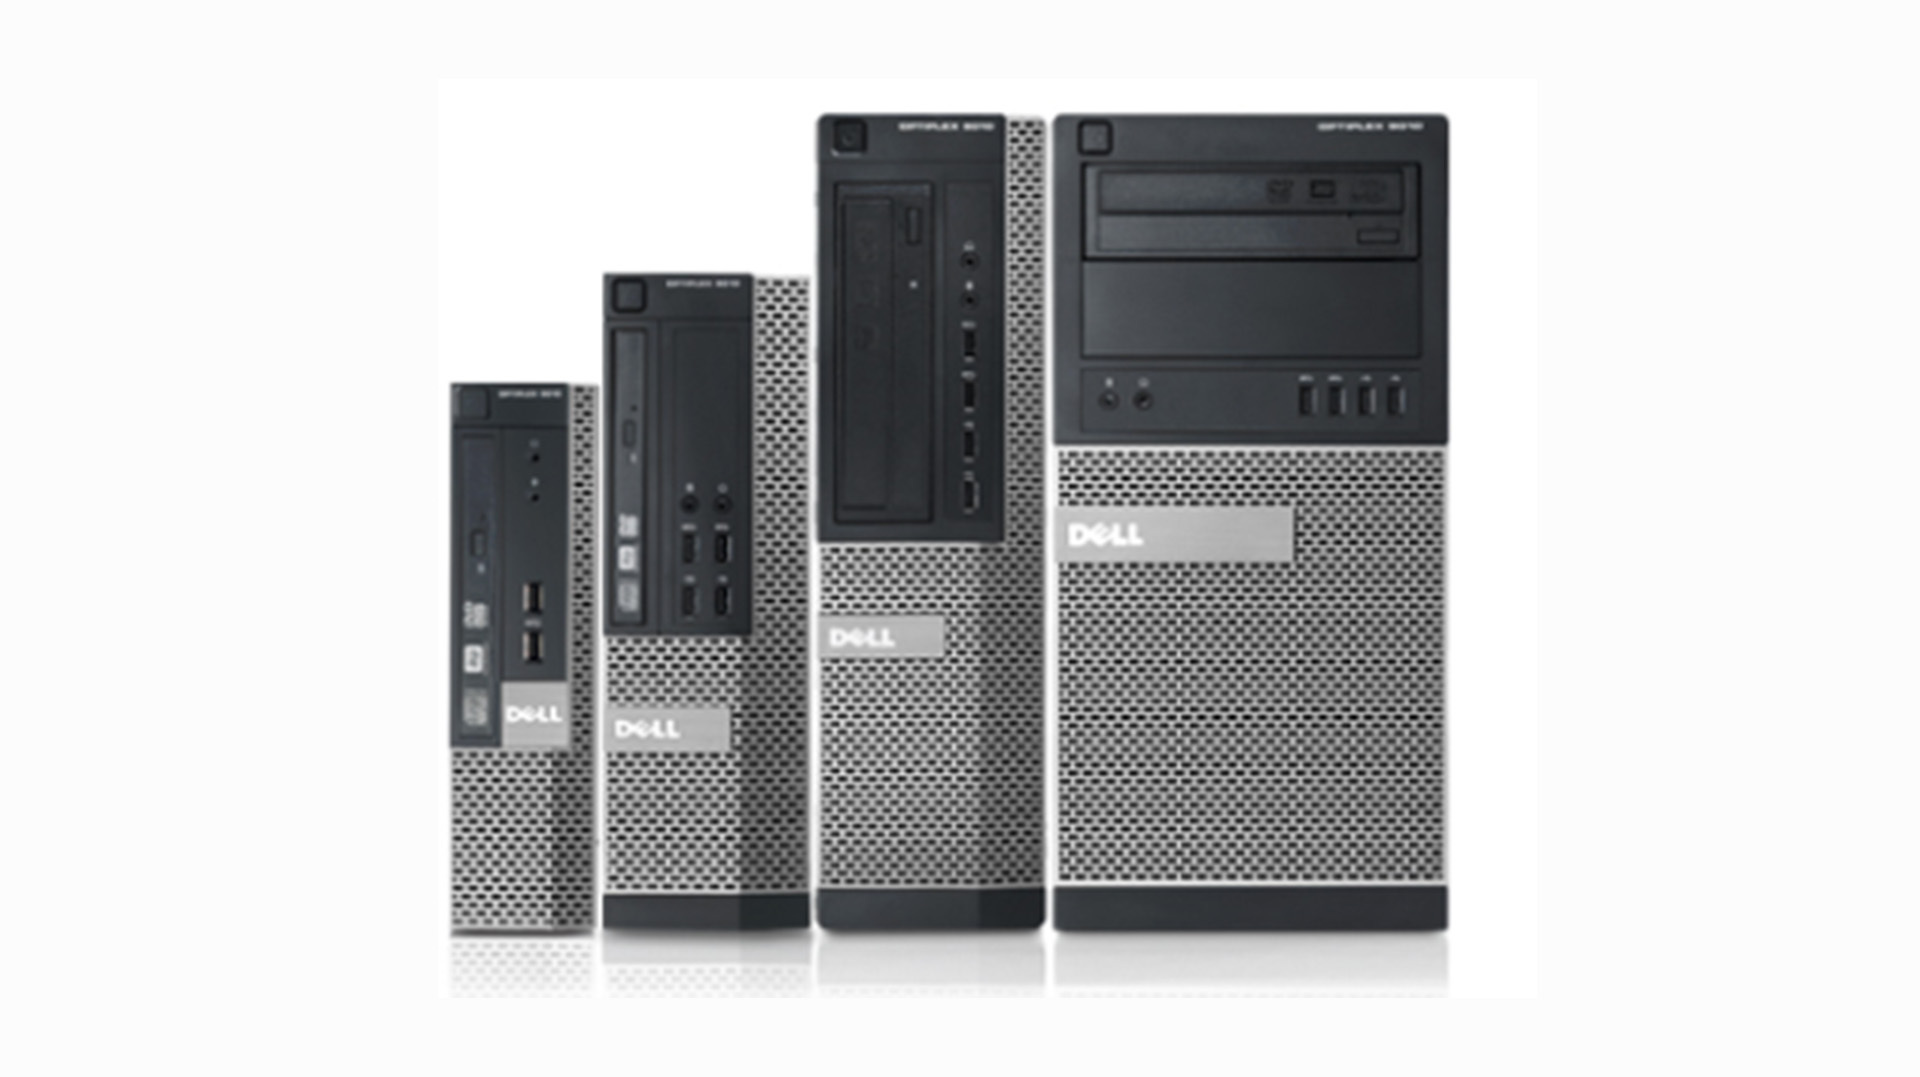 Dell OptiPlex 7010 SFF: Specs and Compatibility - RackSolutions